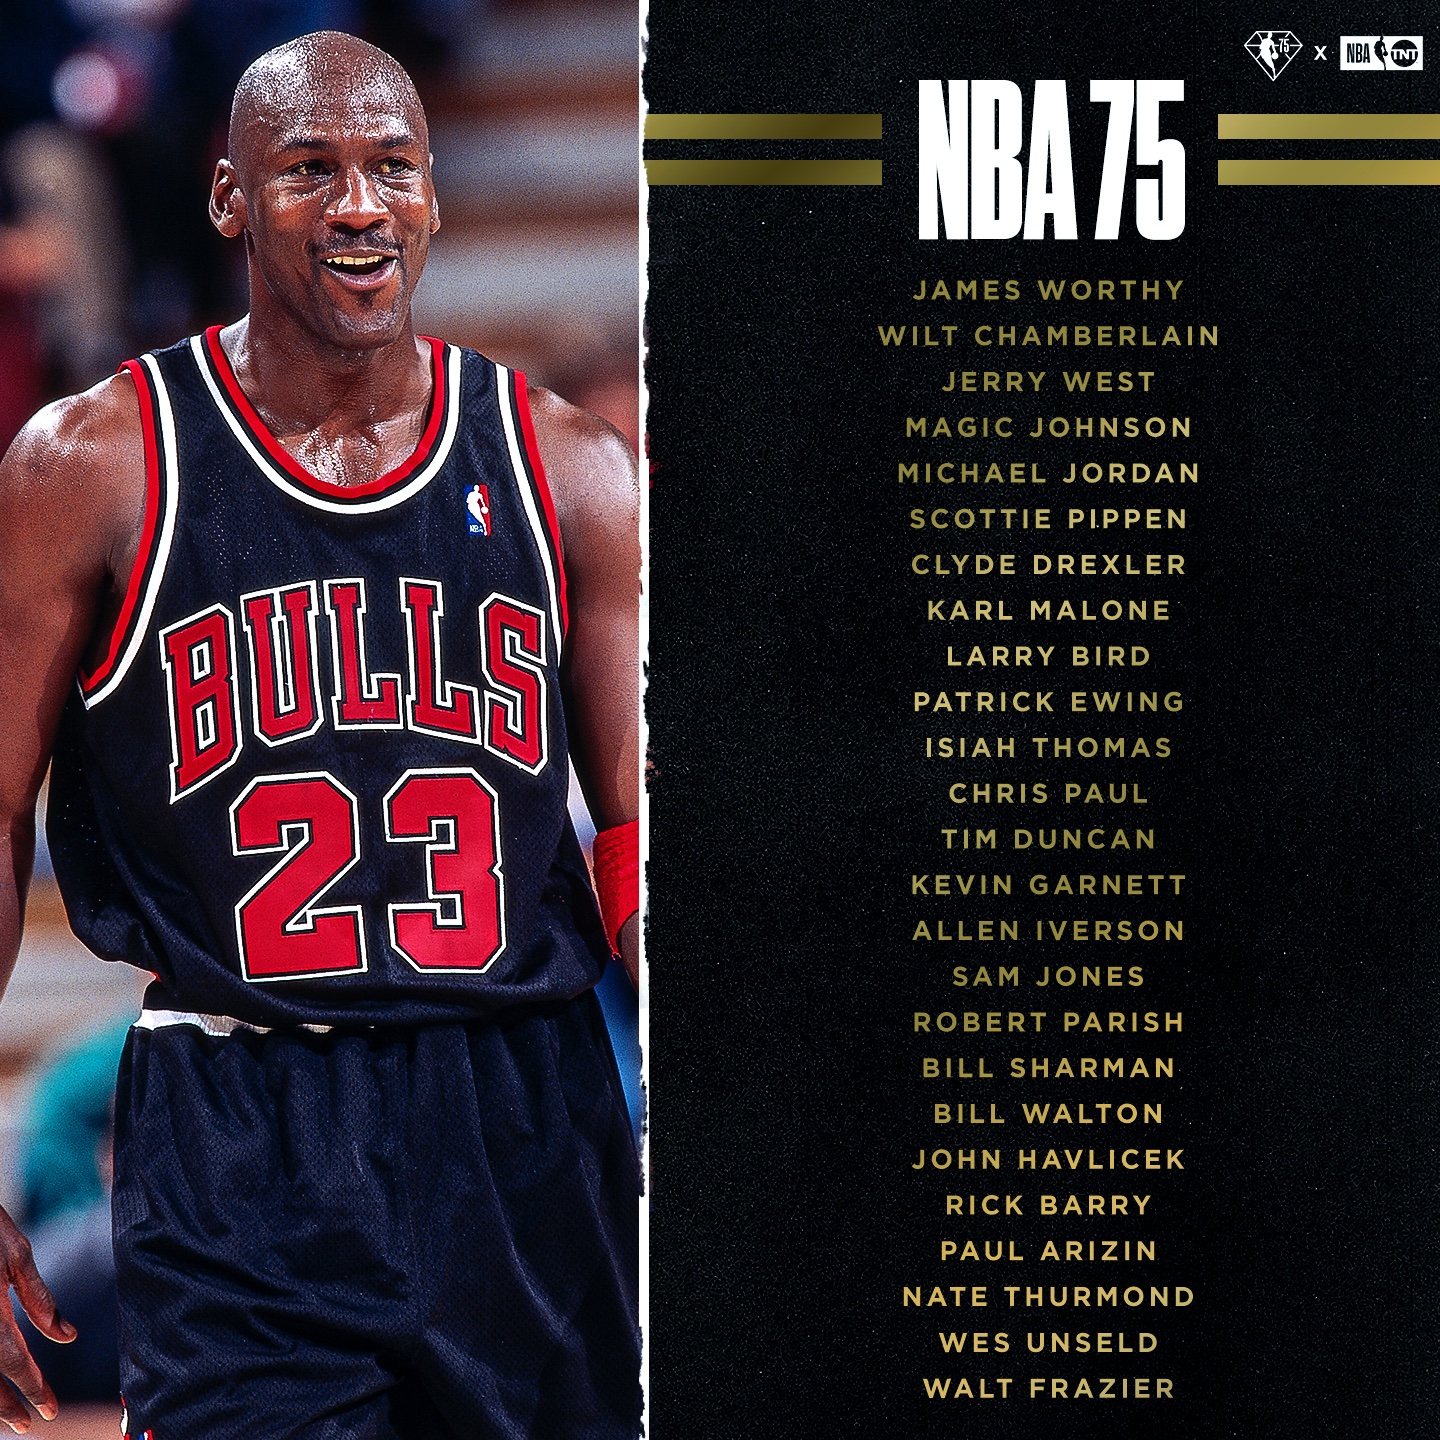 Twitter reacts to final players named to NBA 75th Anniversary Team